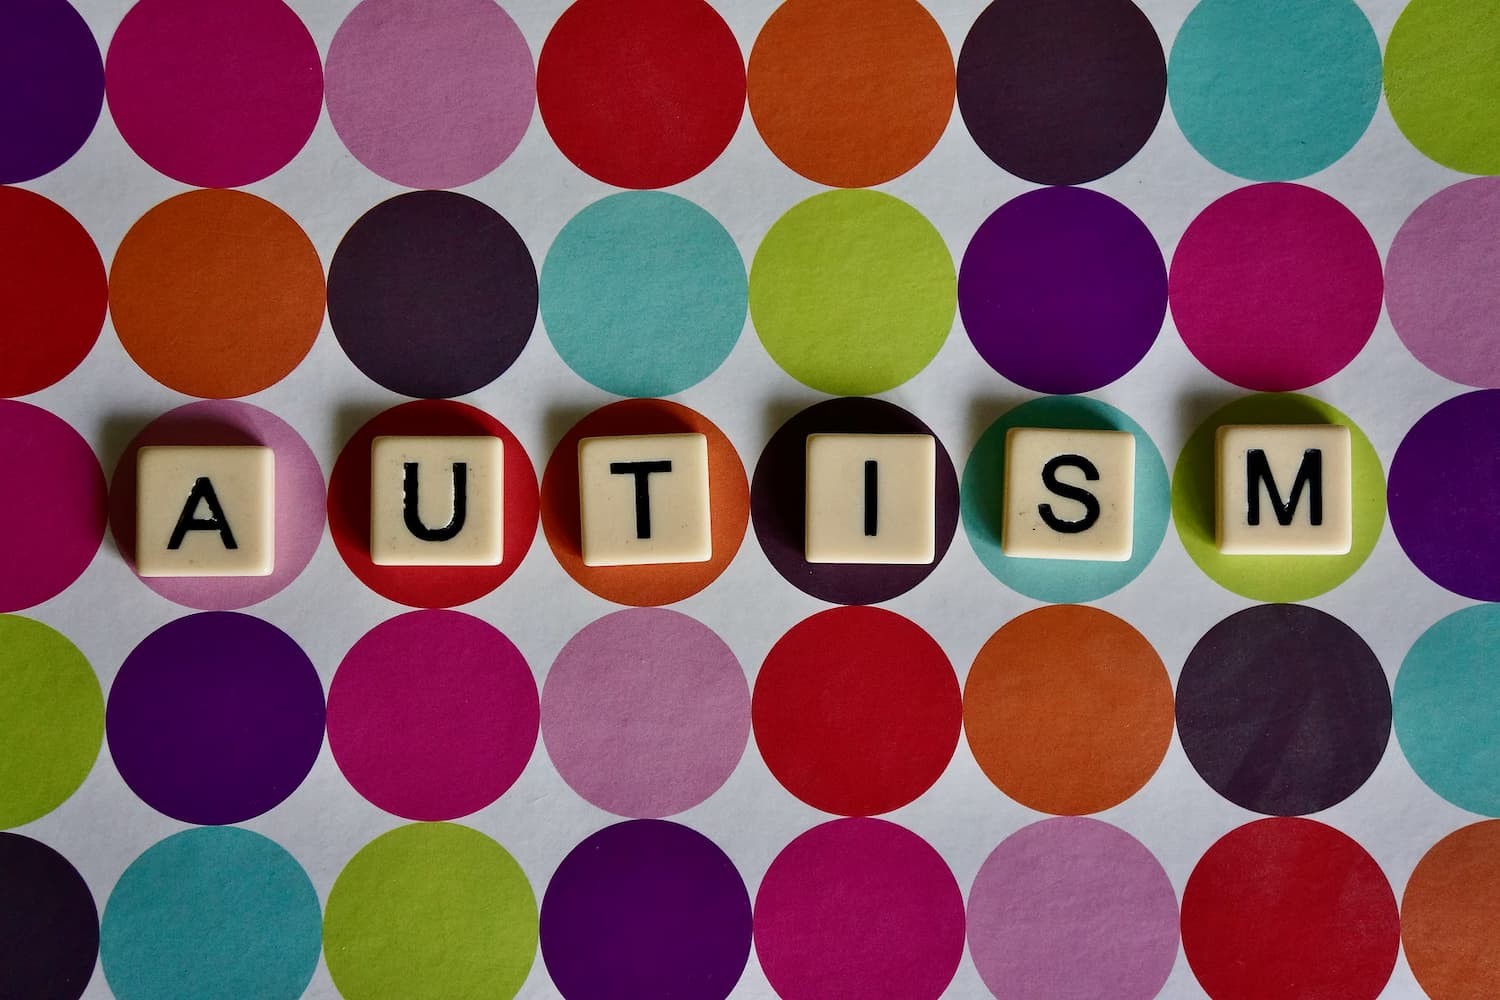 All You Need to Know About Autism Spectrum Disorder